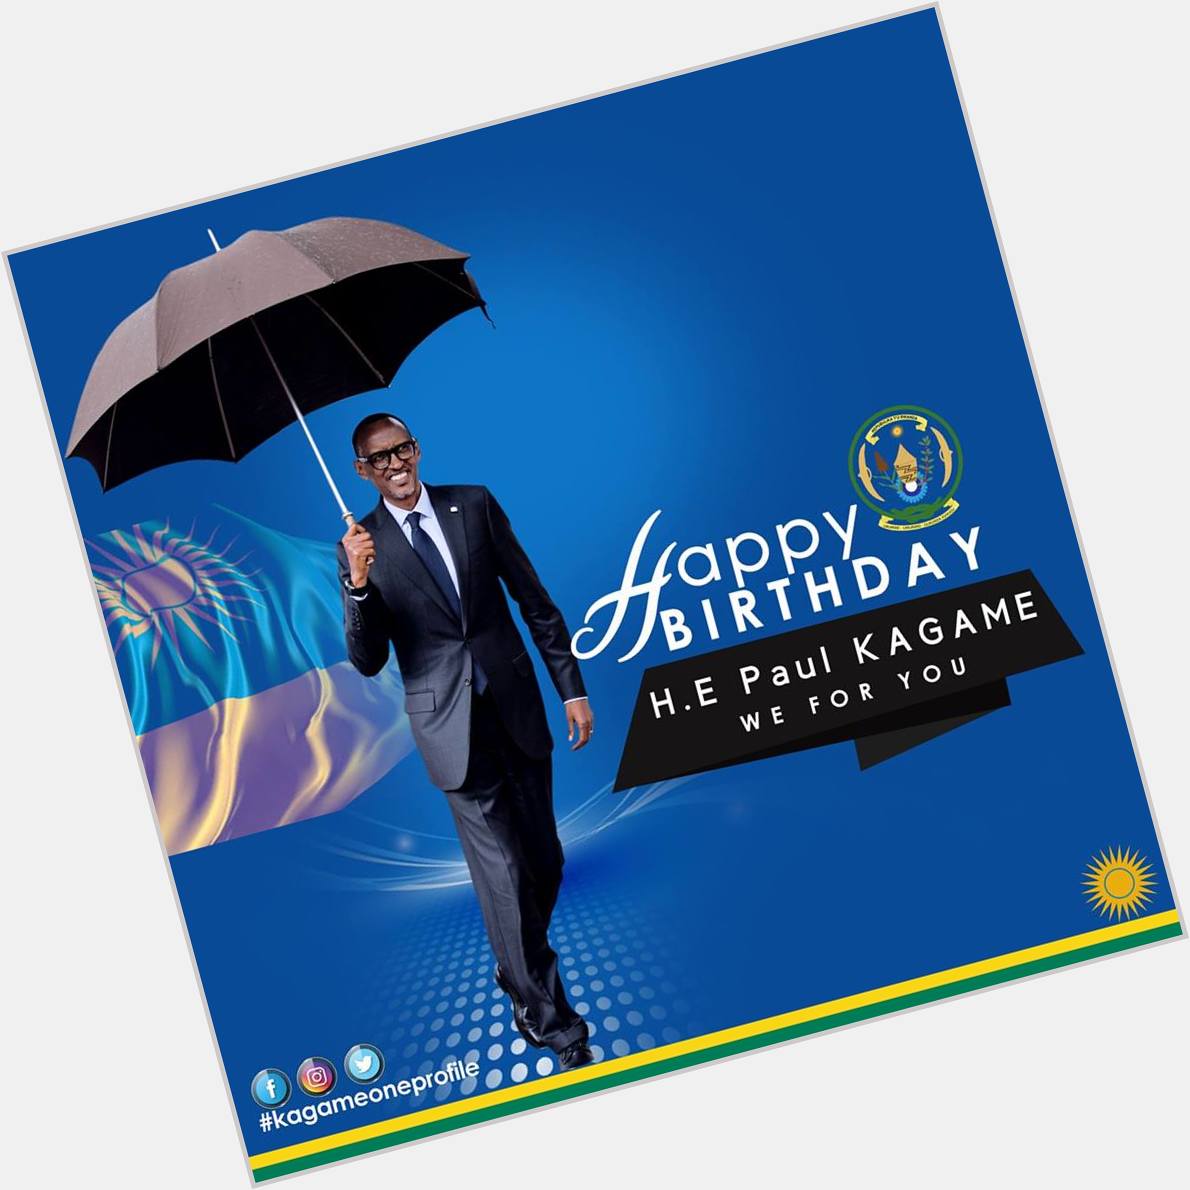 Happy birthday to His Excellence President Paul Kagame.  